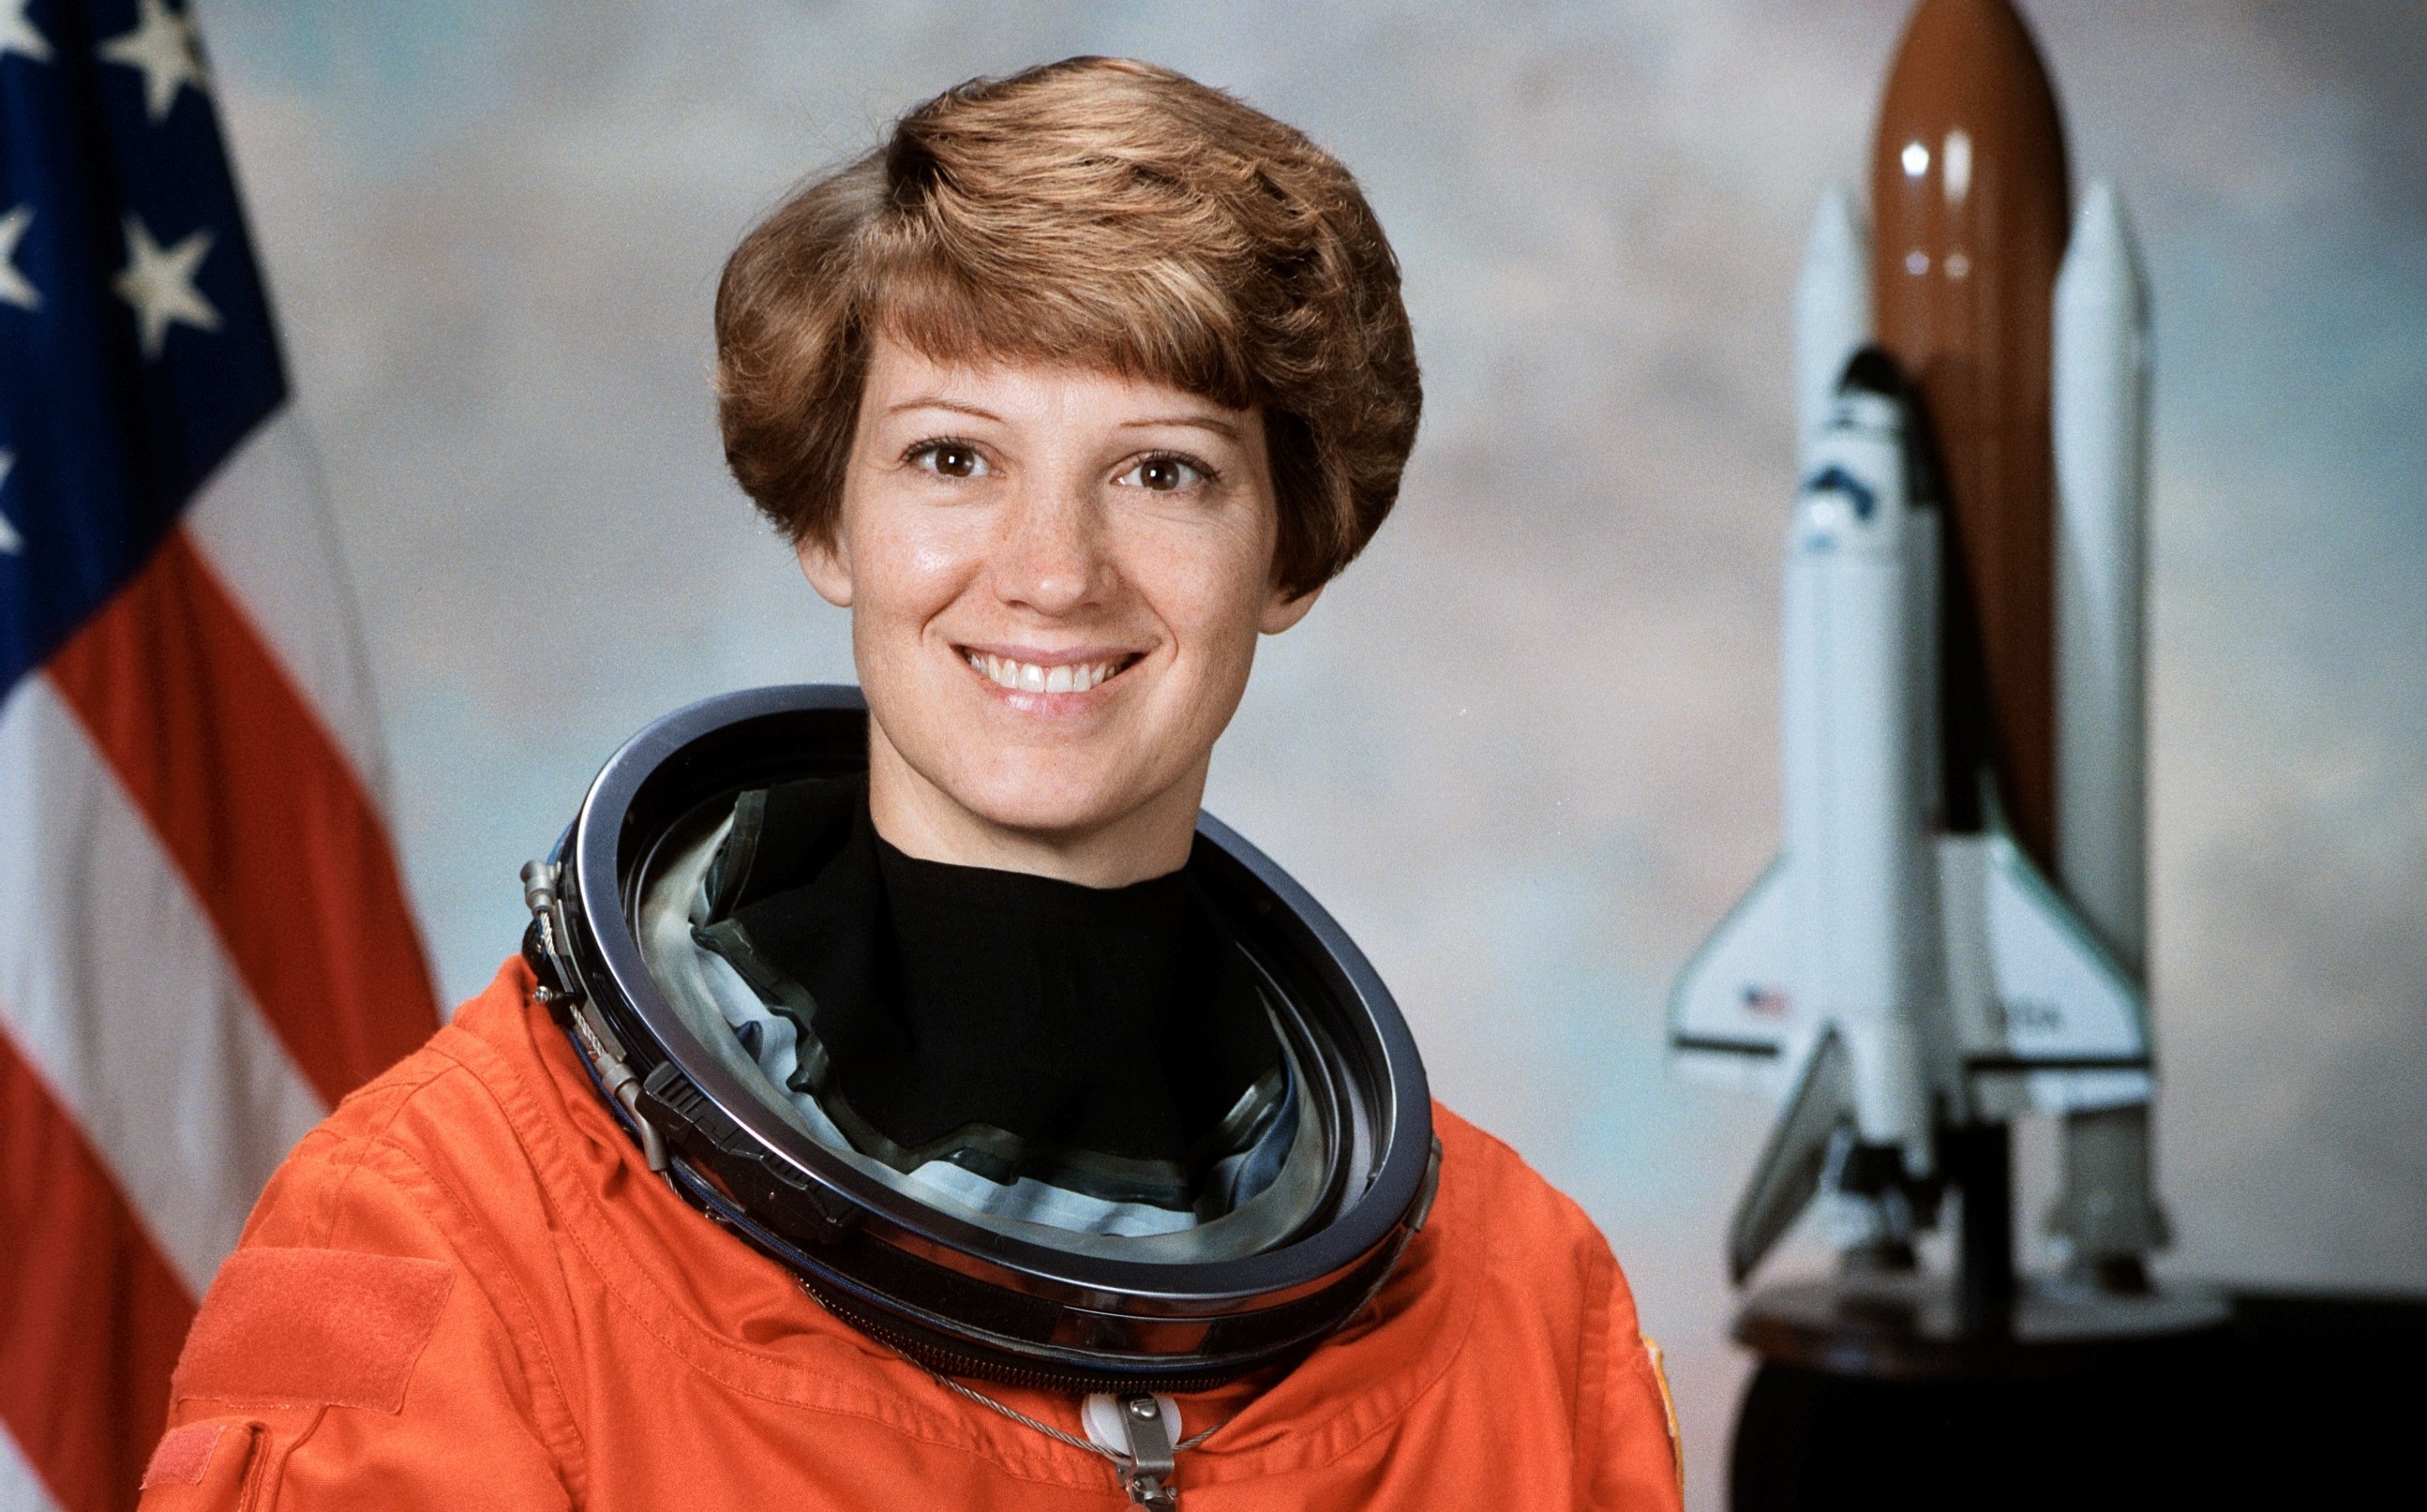 ENTITY discusses why Eileen Collins is one of the important female astronauts.